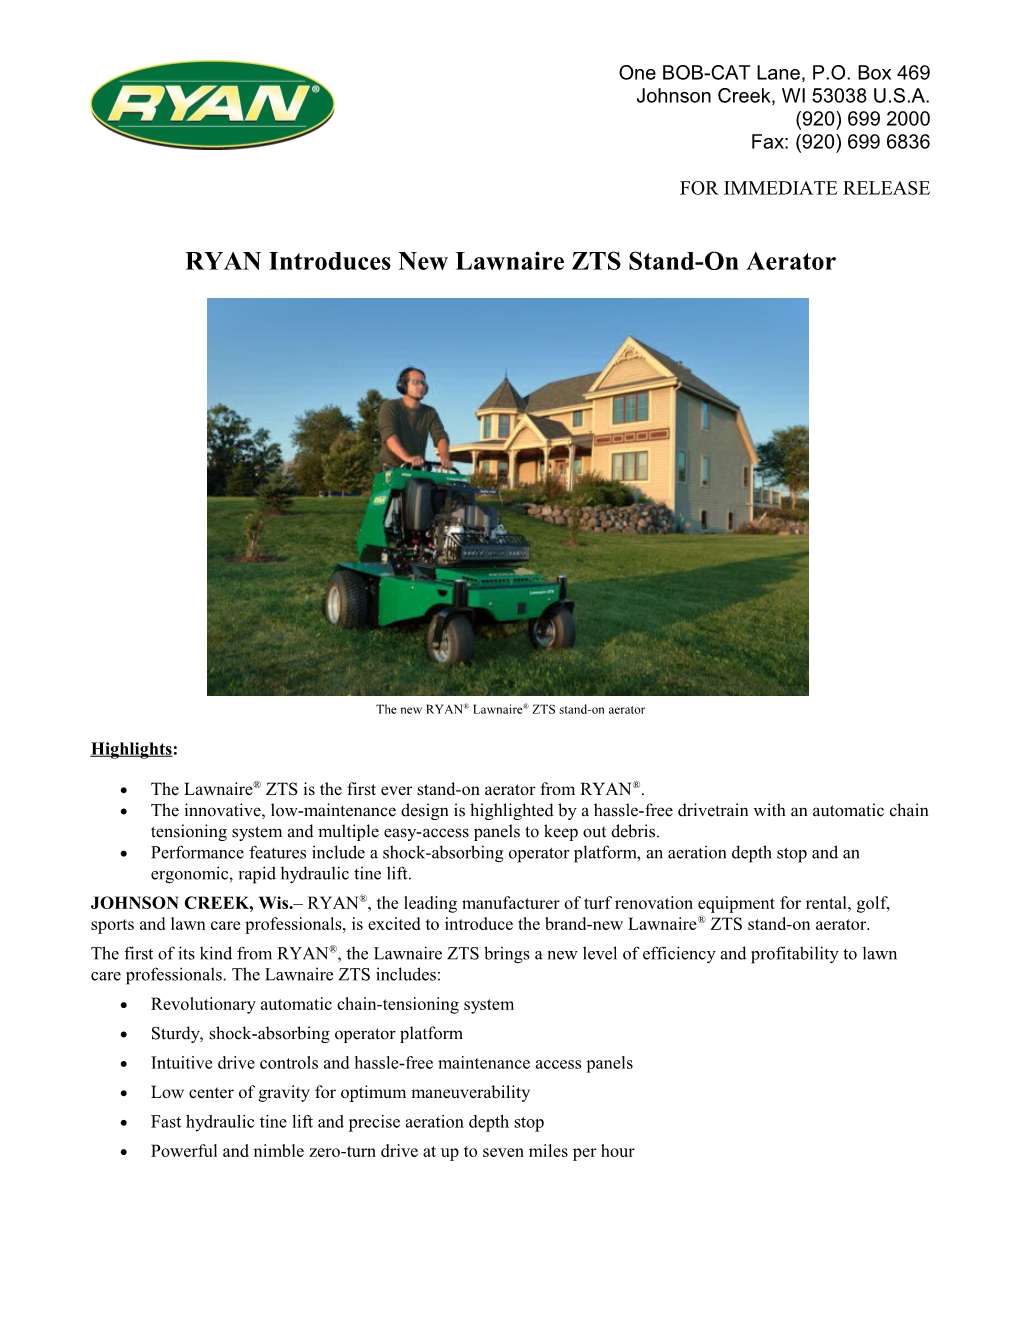 Ryanintroduces New Lawnaire ZTS Stand-On Aerator